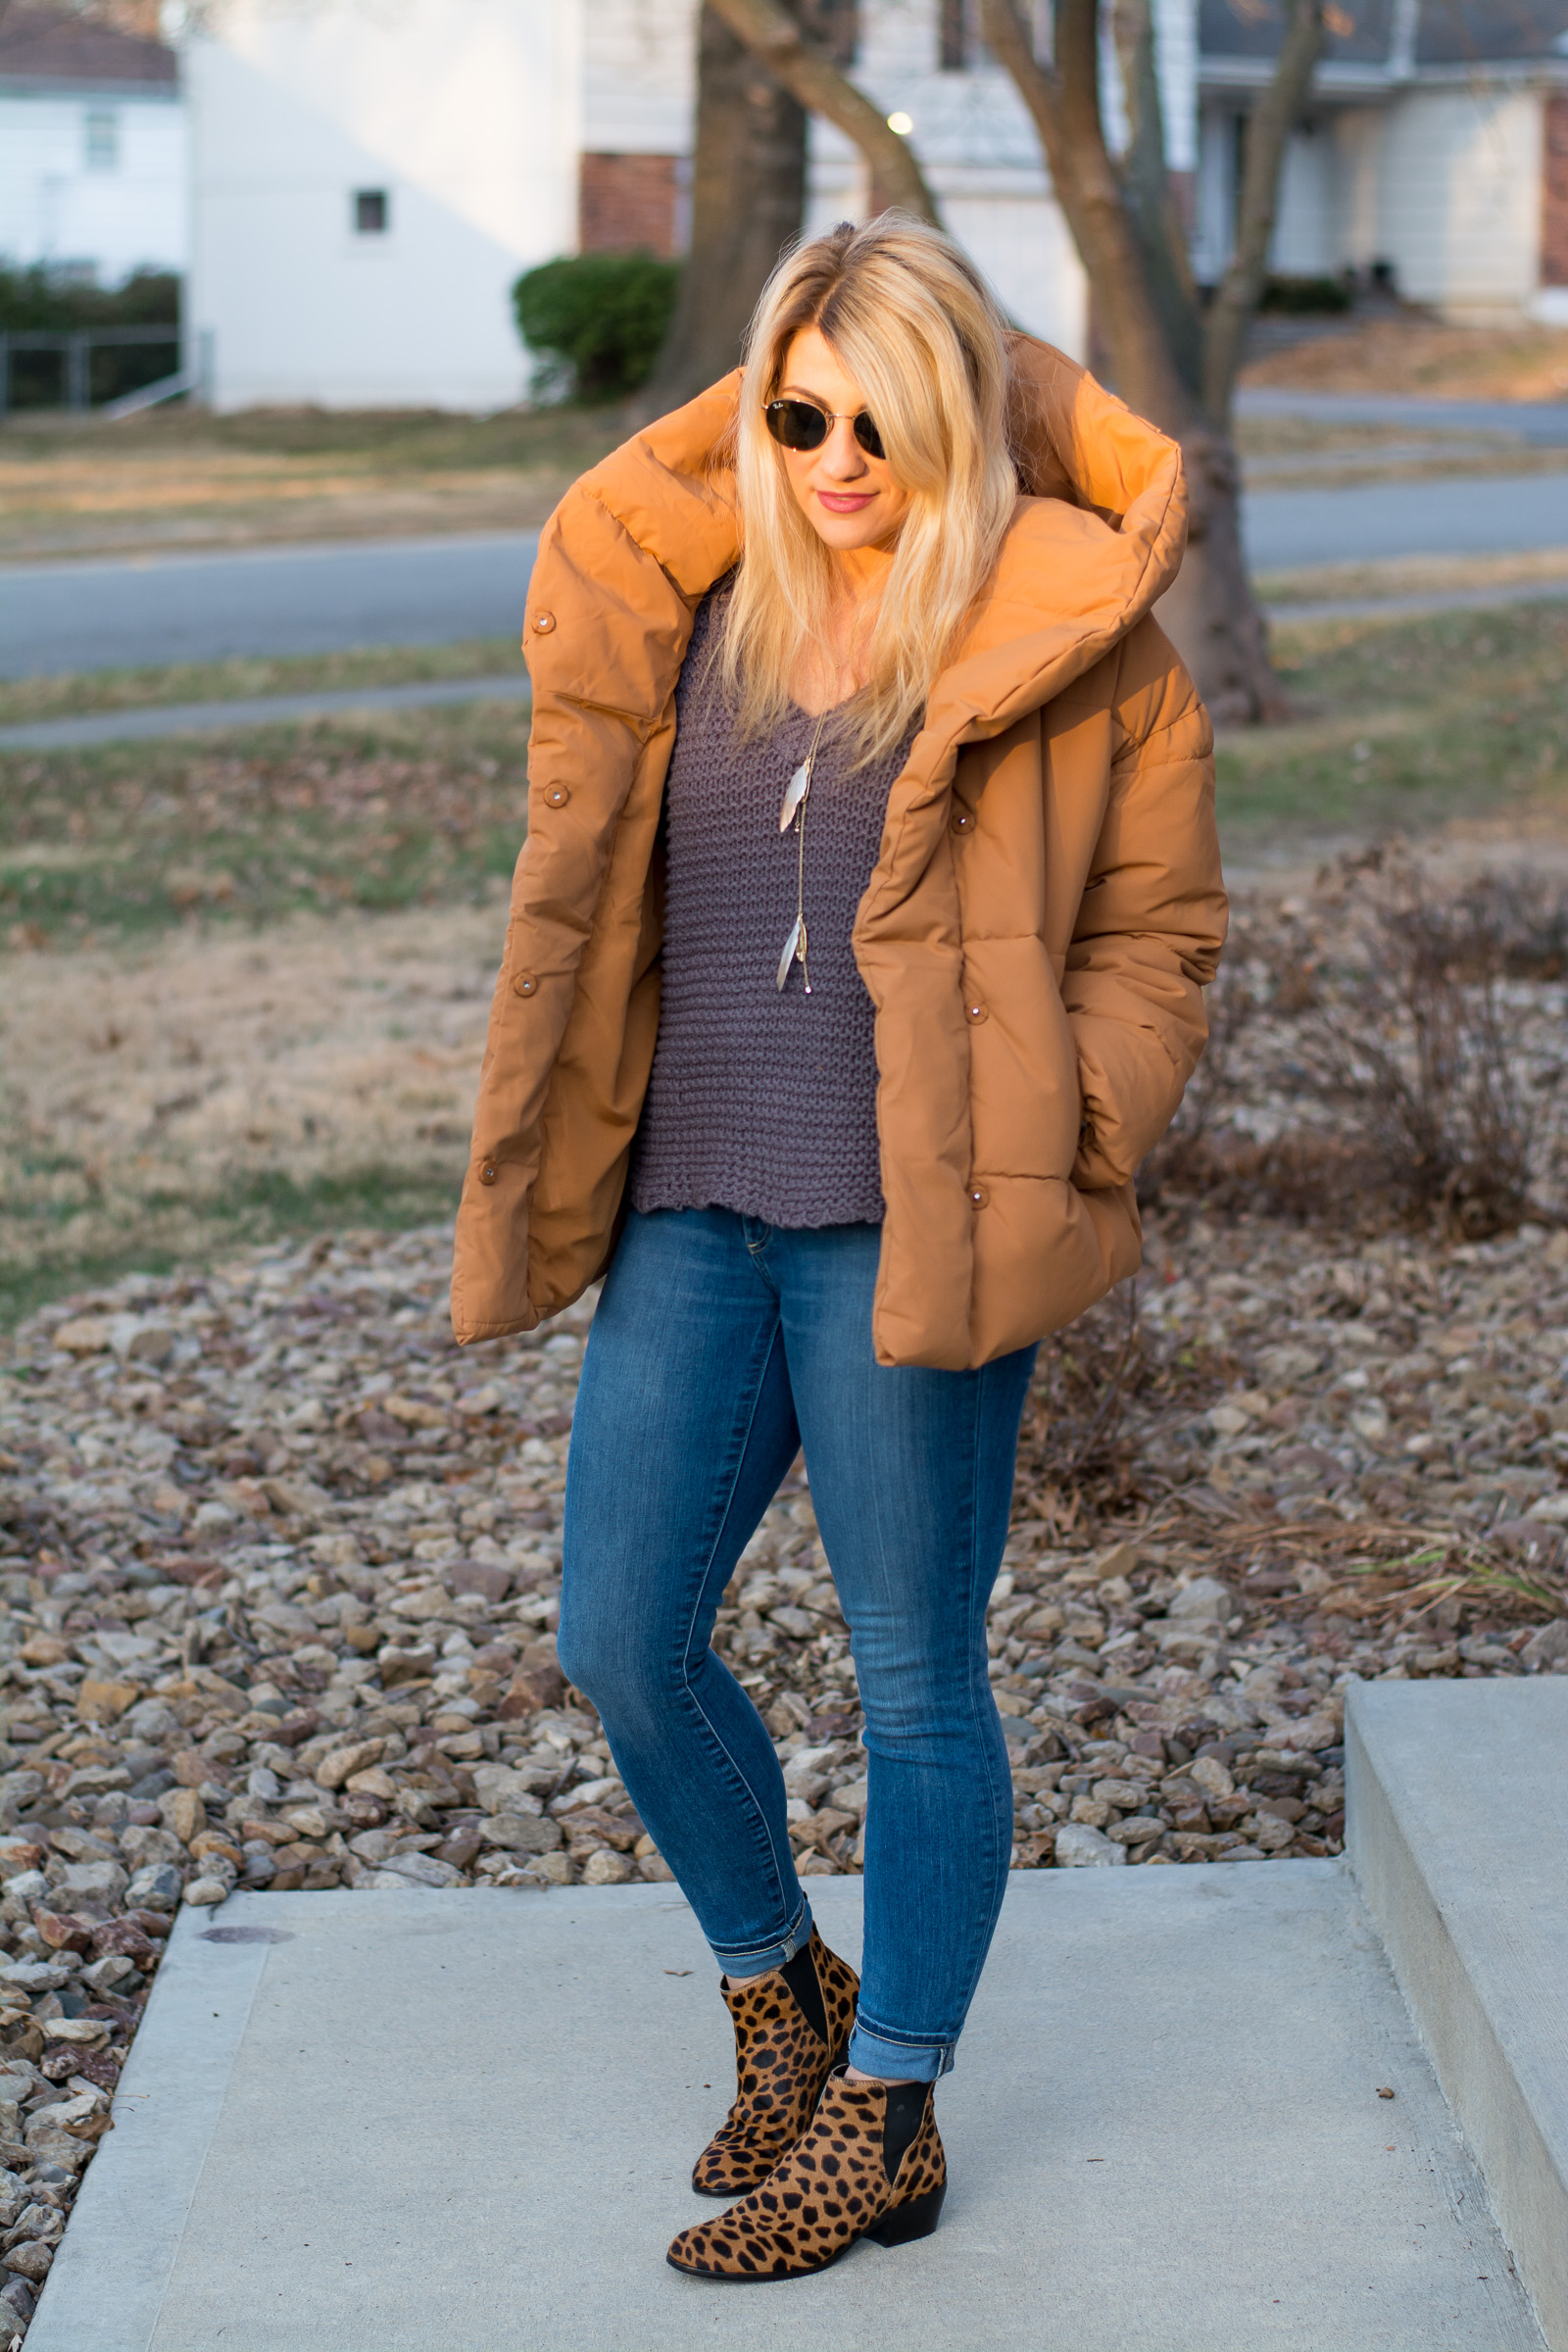 Styling a Puffer Jacket. | Ashley from Le Stylo Rouge